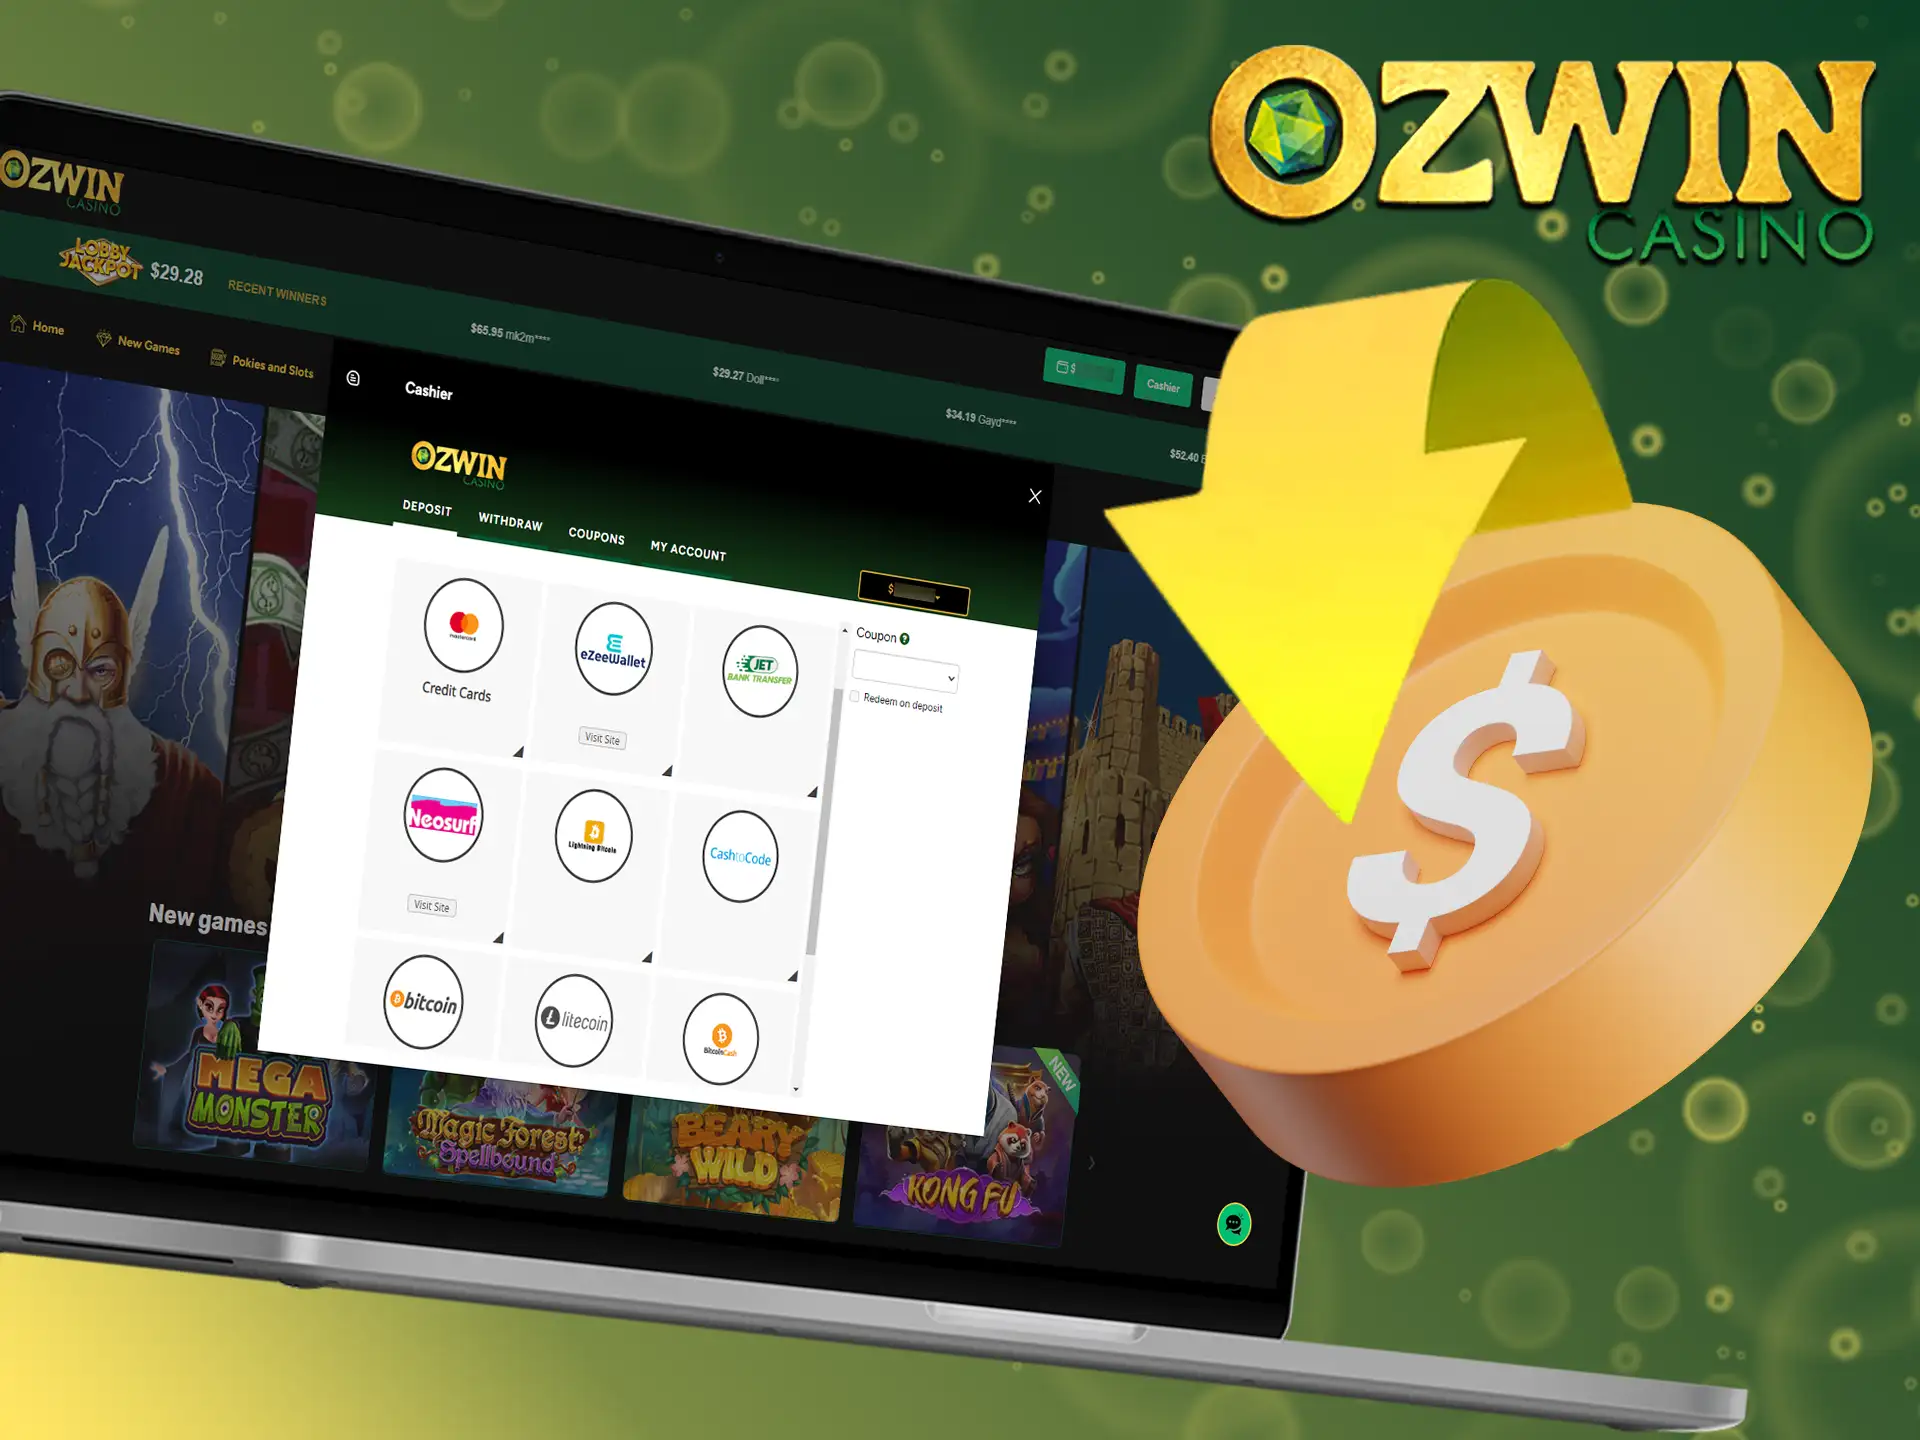 You can easily add funds to your Ozwin account using our selection of reliable and efficient payment options.